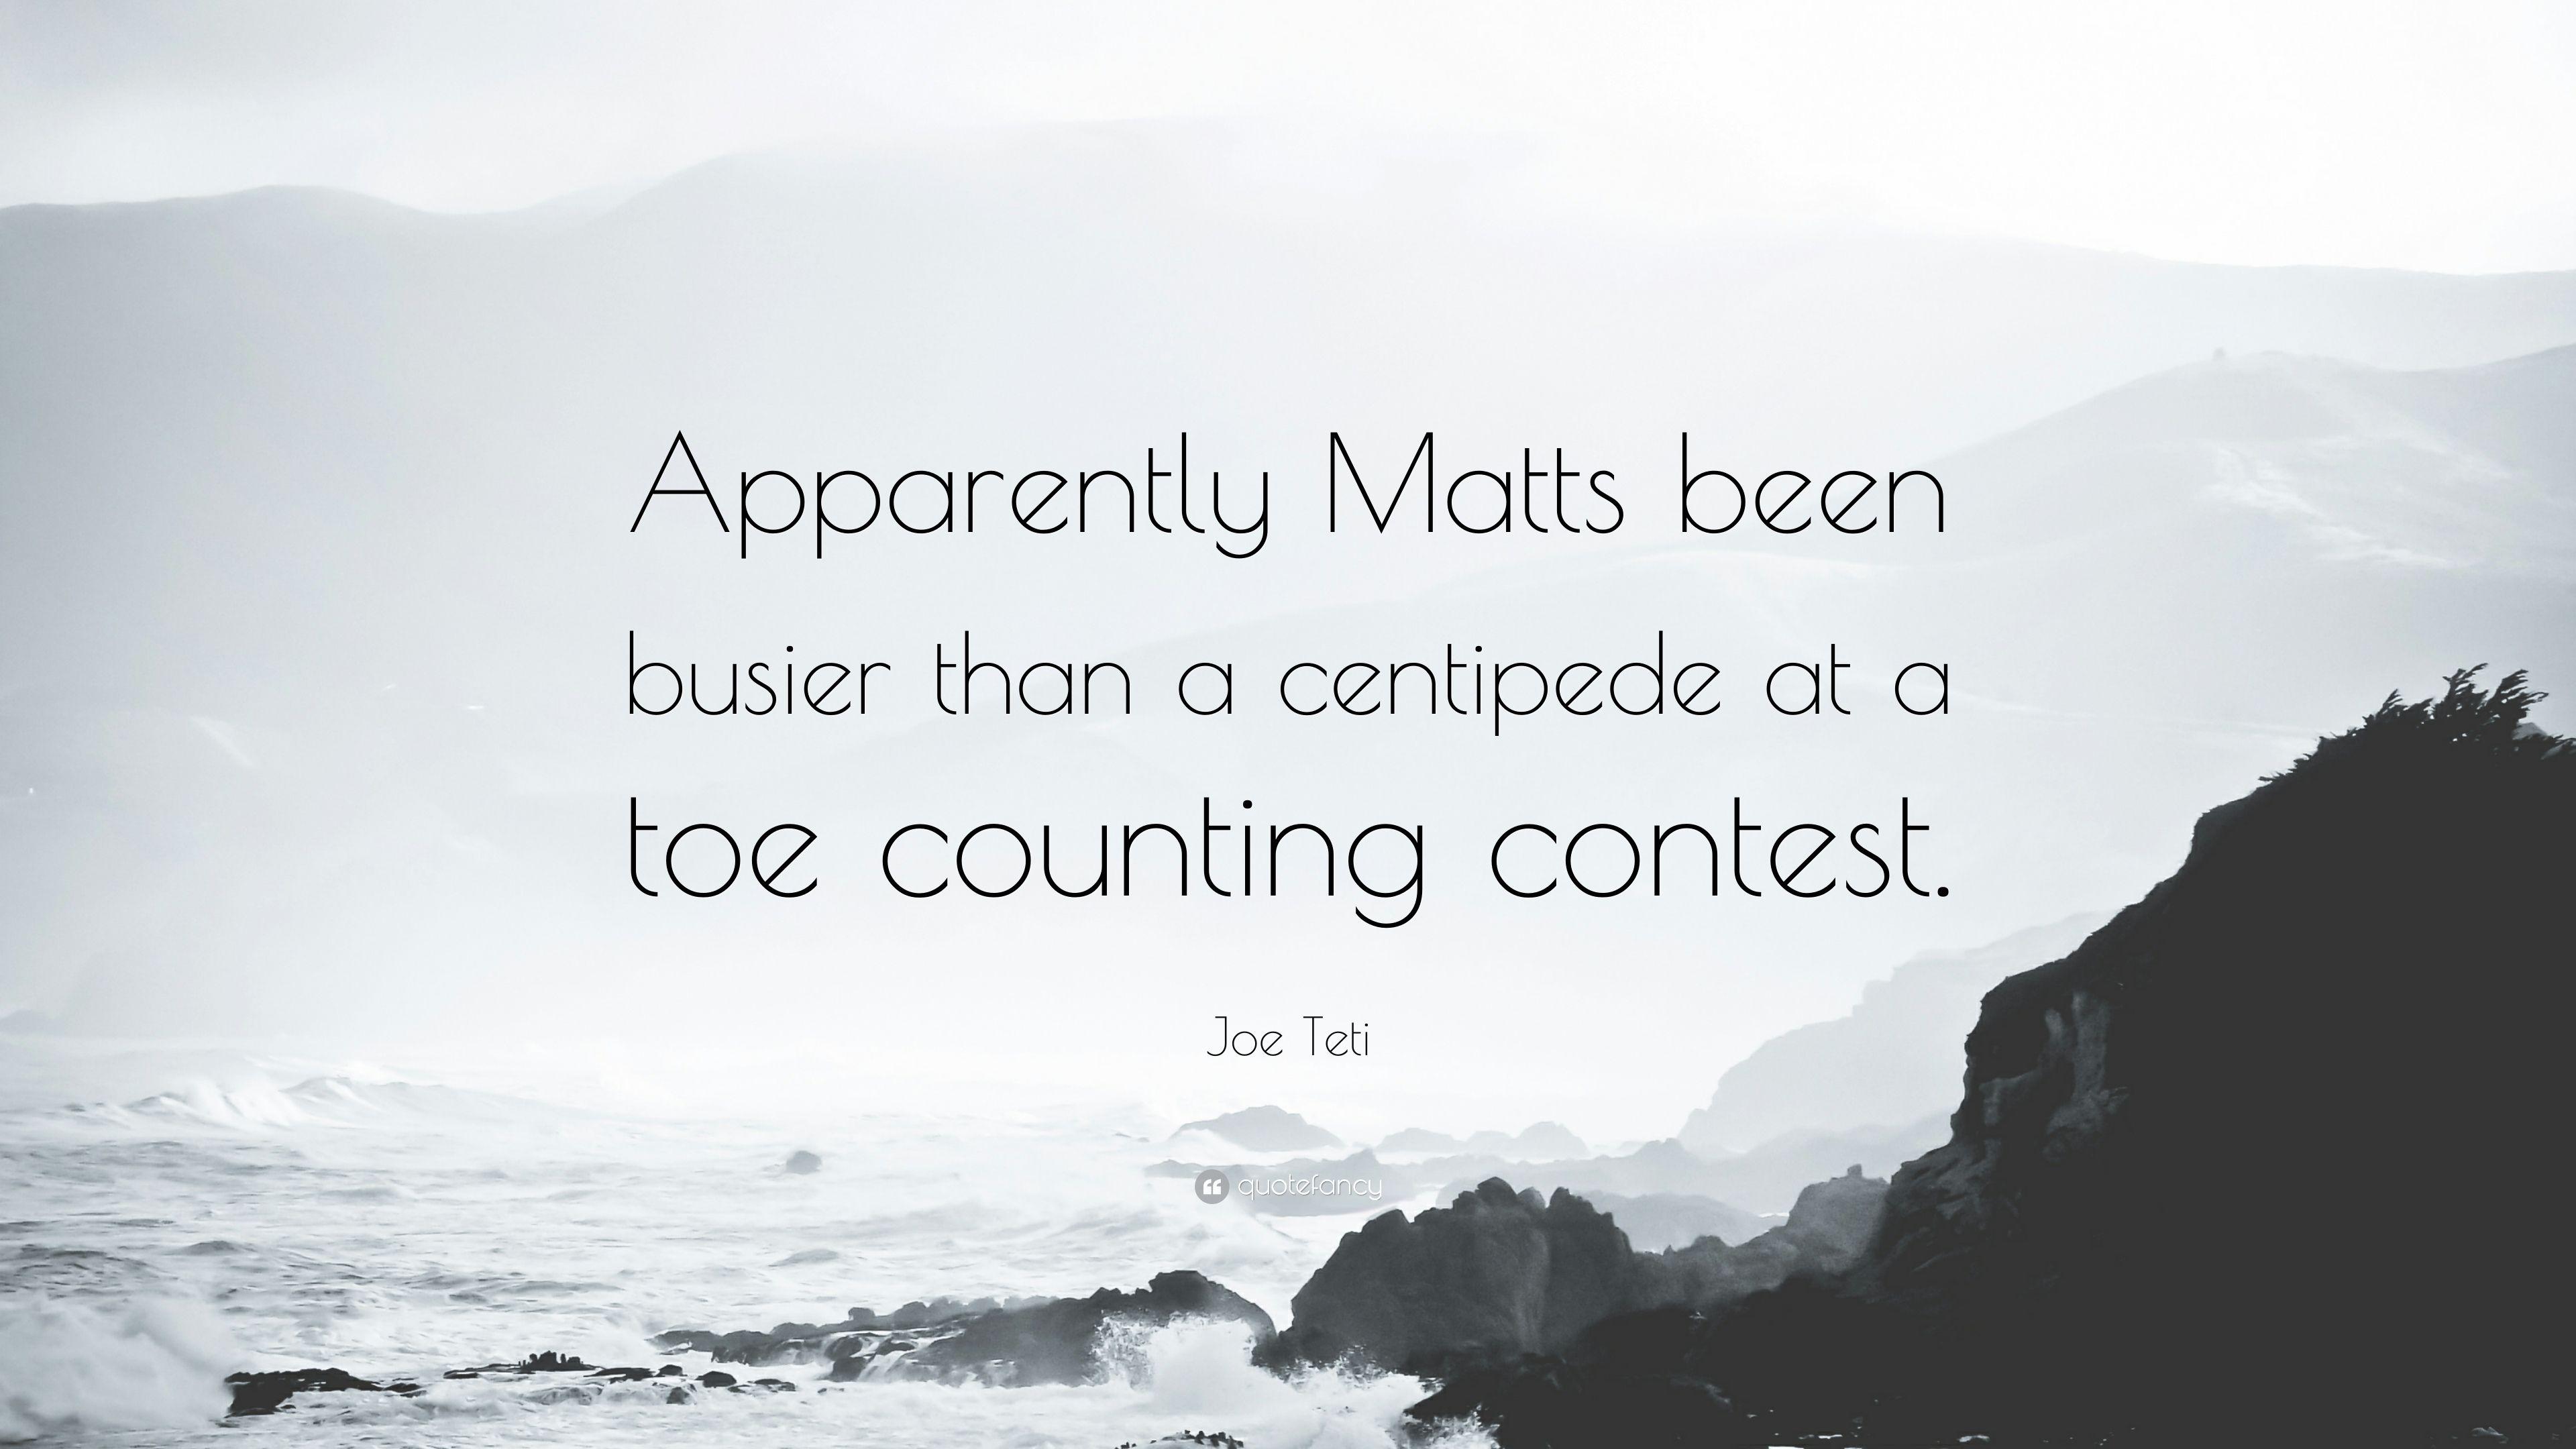 Joe Teti Quote: “Apparently Matts been busier than a centipede at a